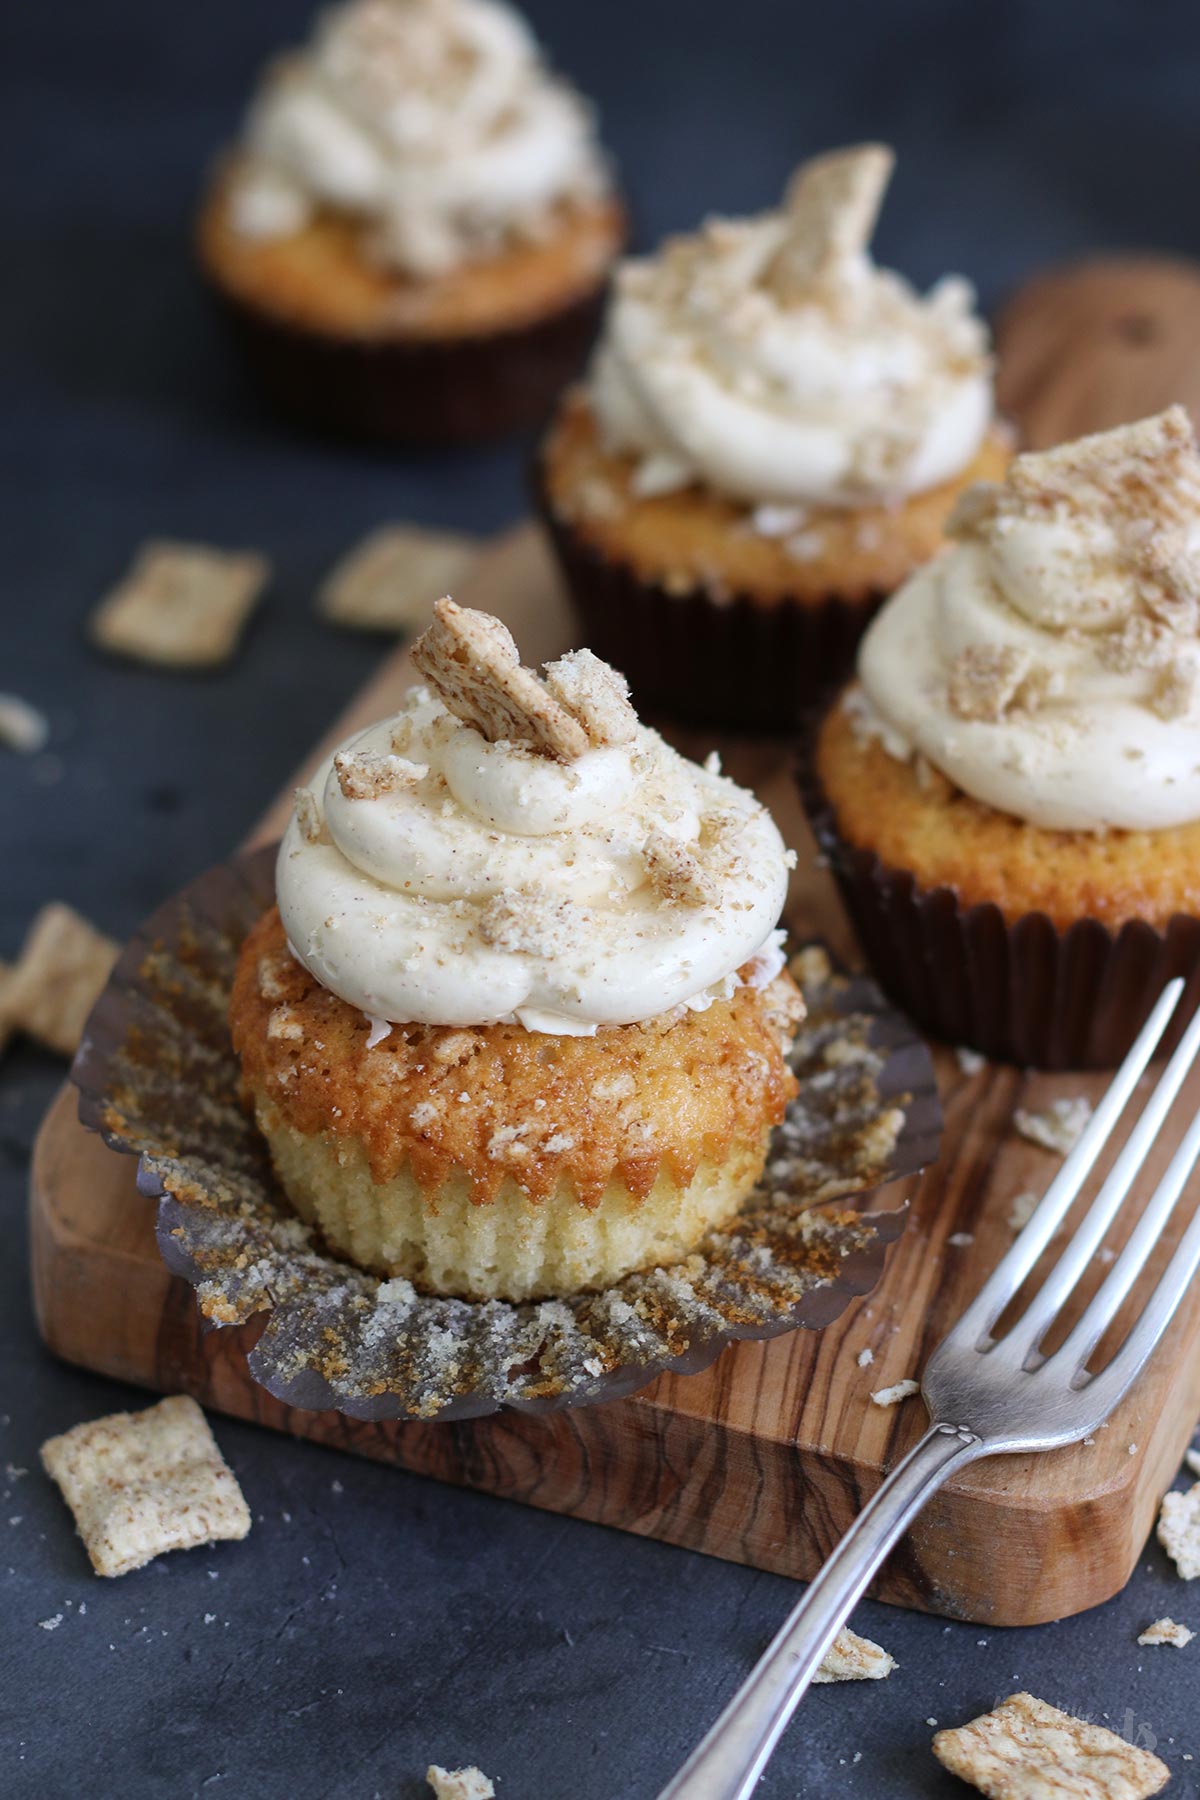 Cinnamon Crunch Cupcakes | Bake to the roots